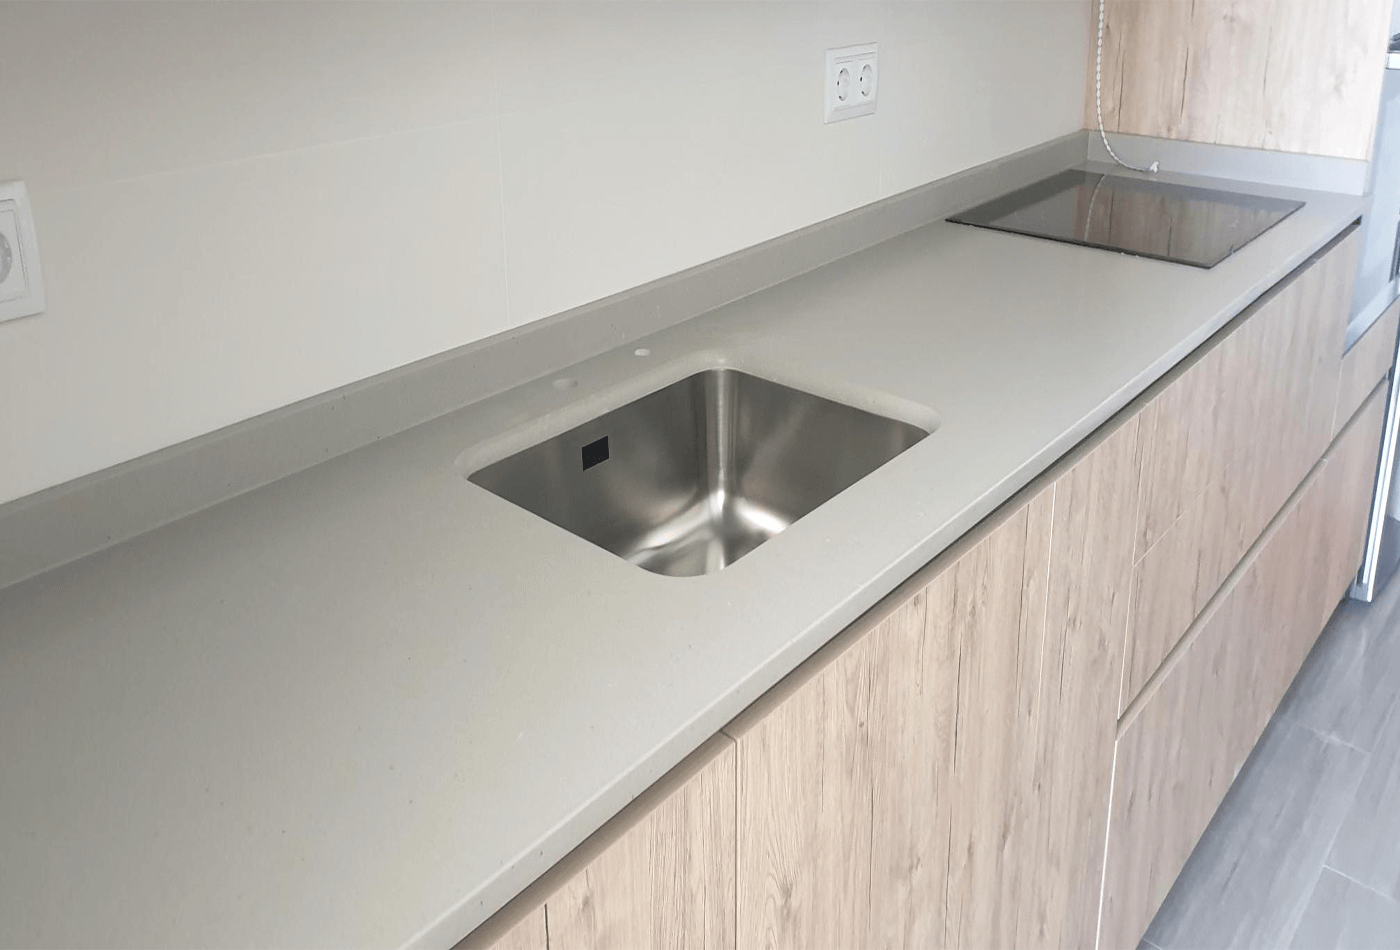 Invest in a Fantastic, Versatile Worktop that is Durable